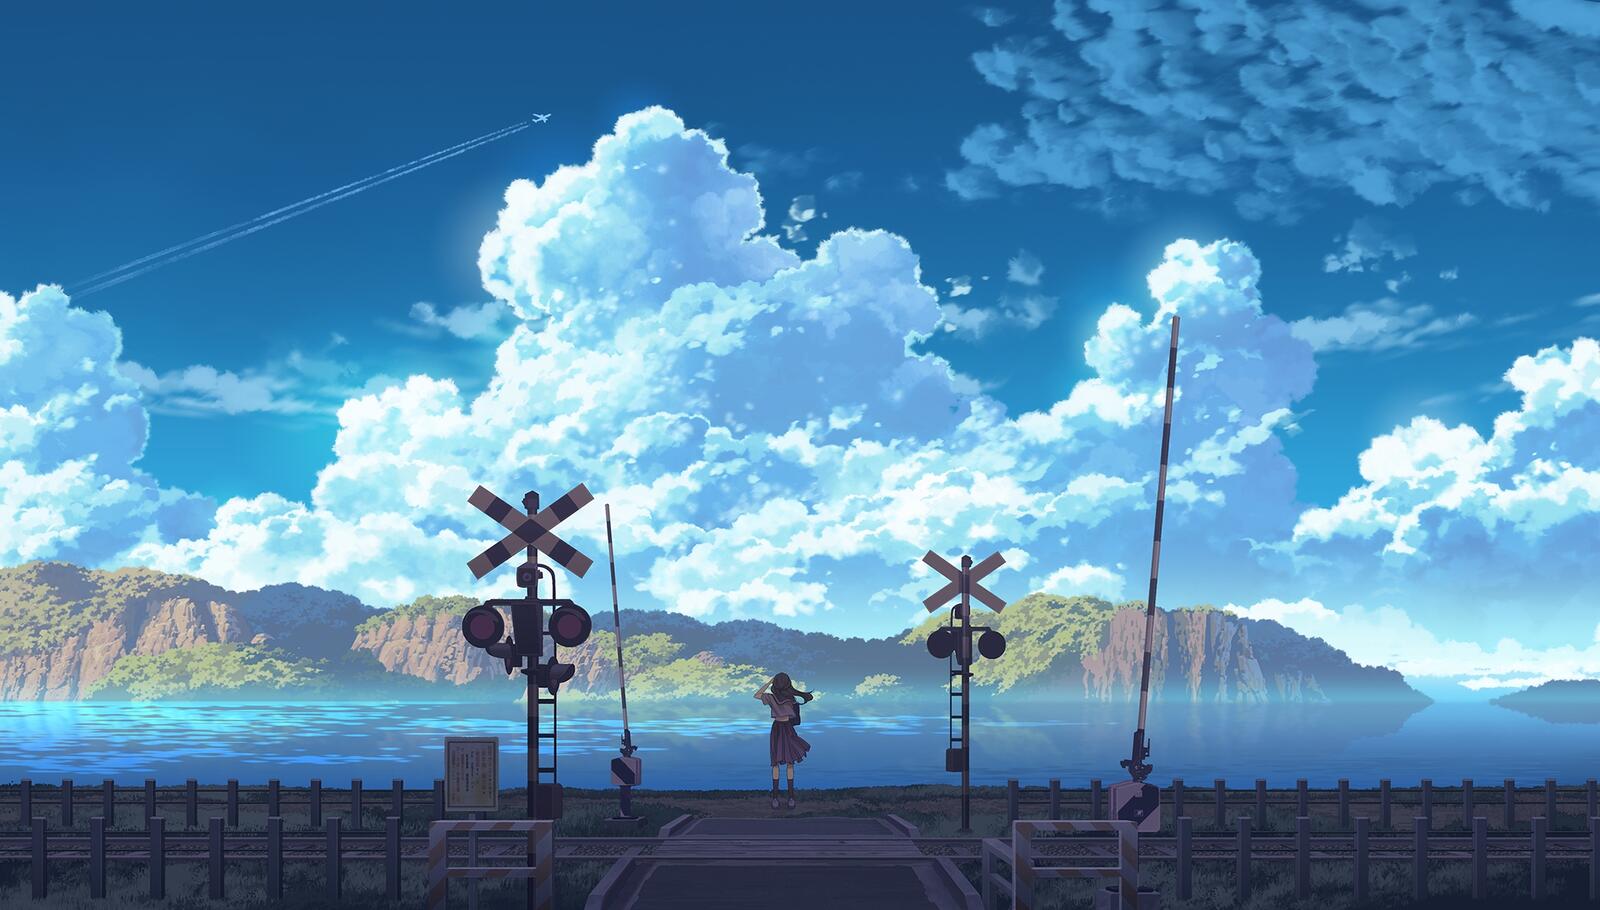 Wallpapers anime girl train station clouds on the desktop